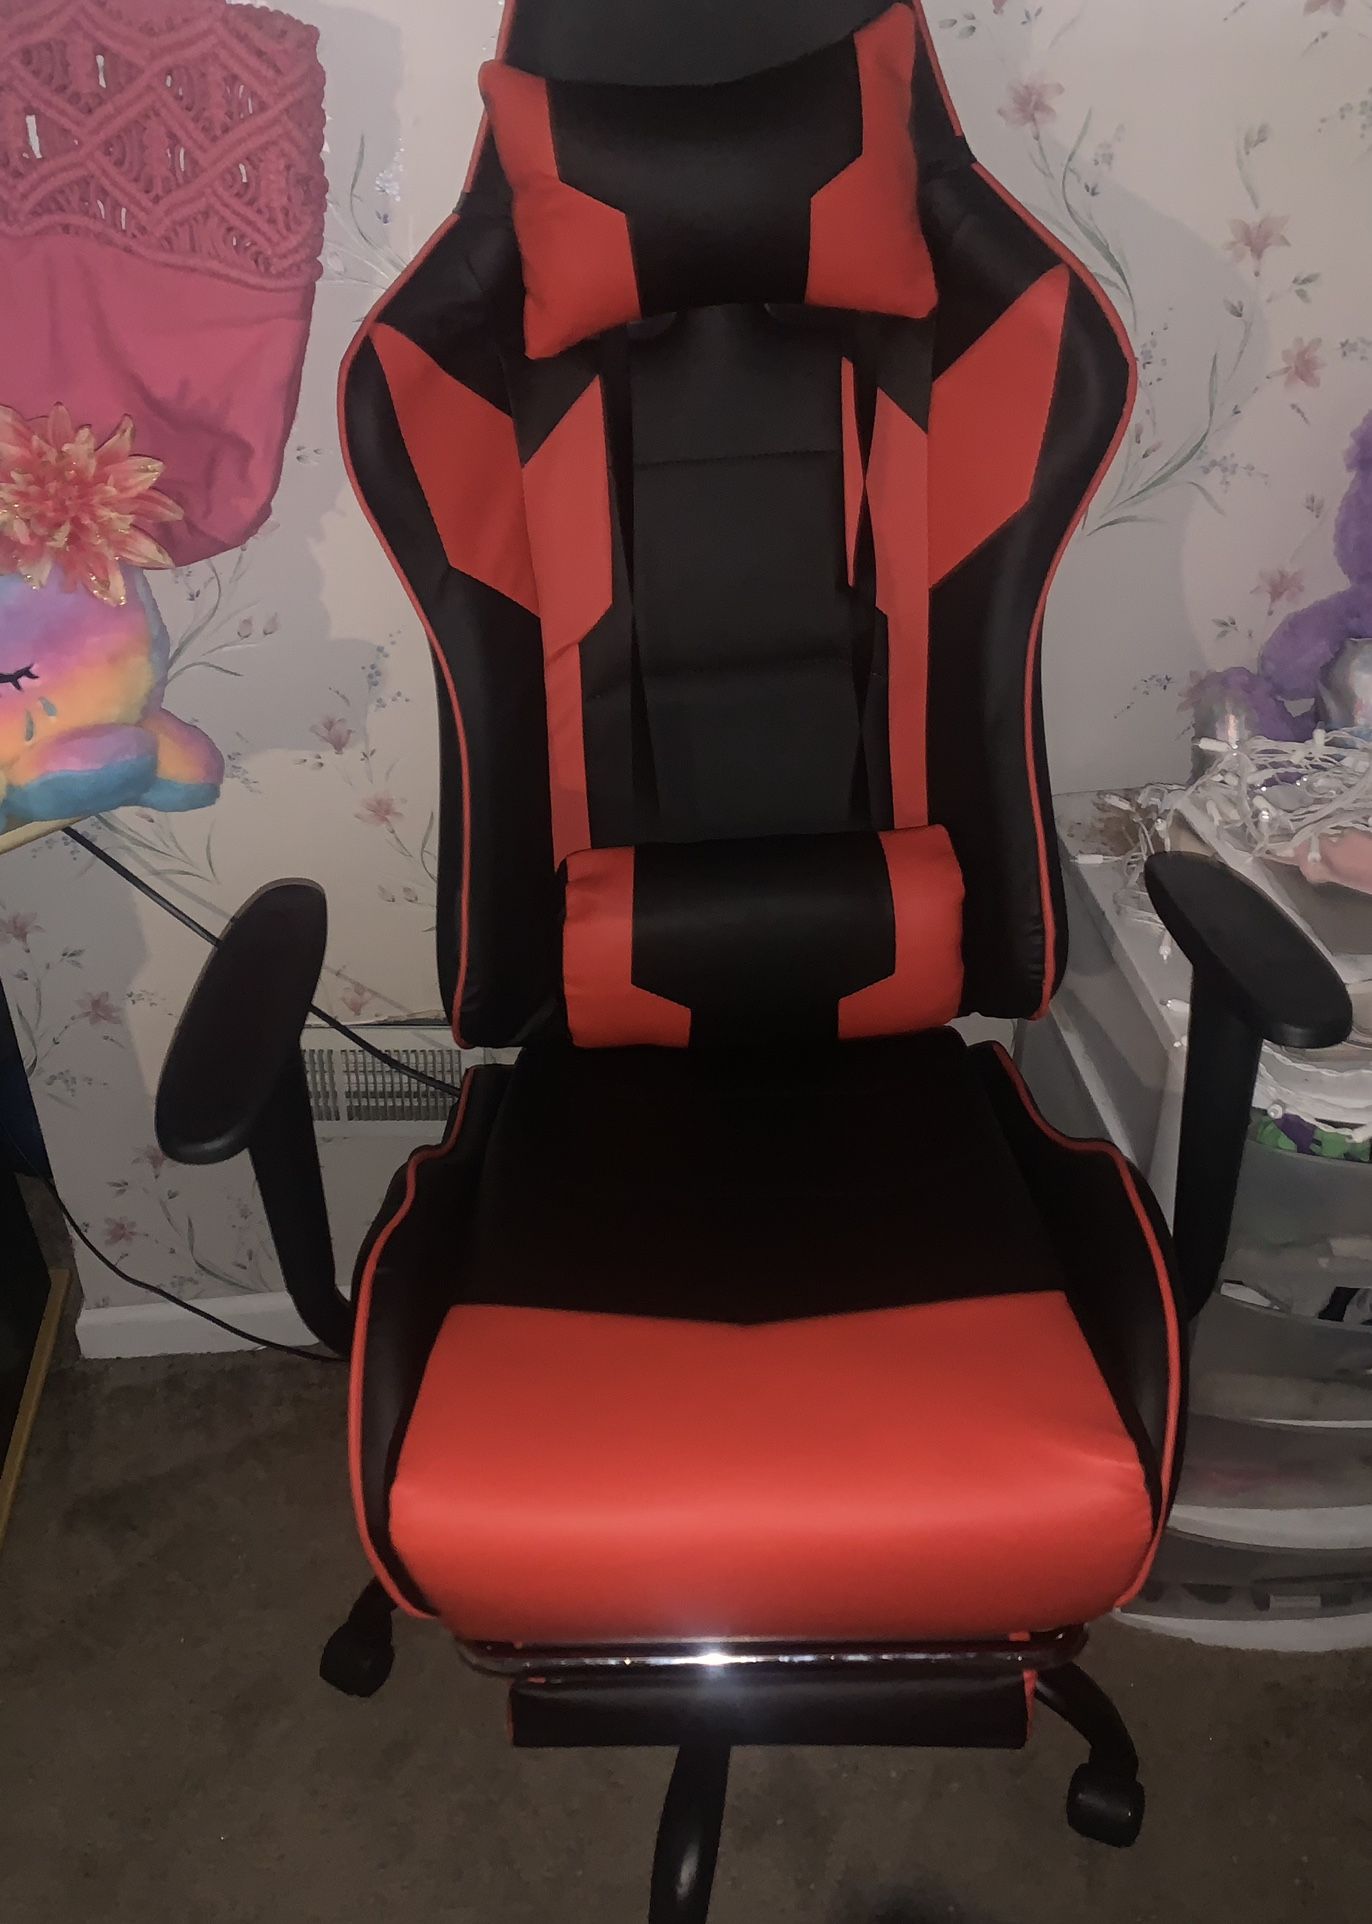 Brand new gaming chair